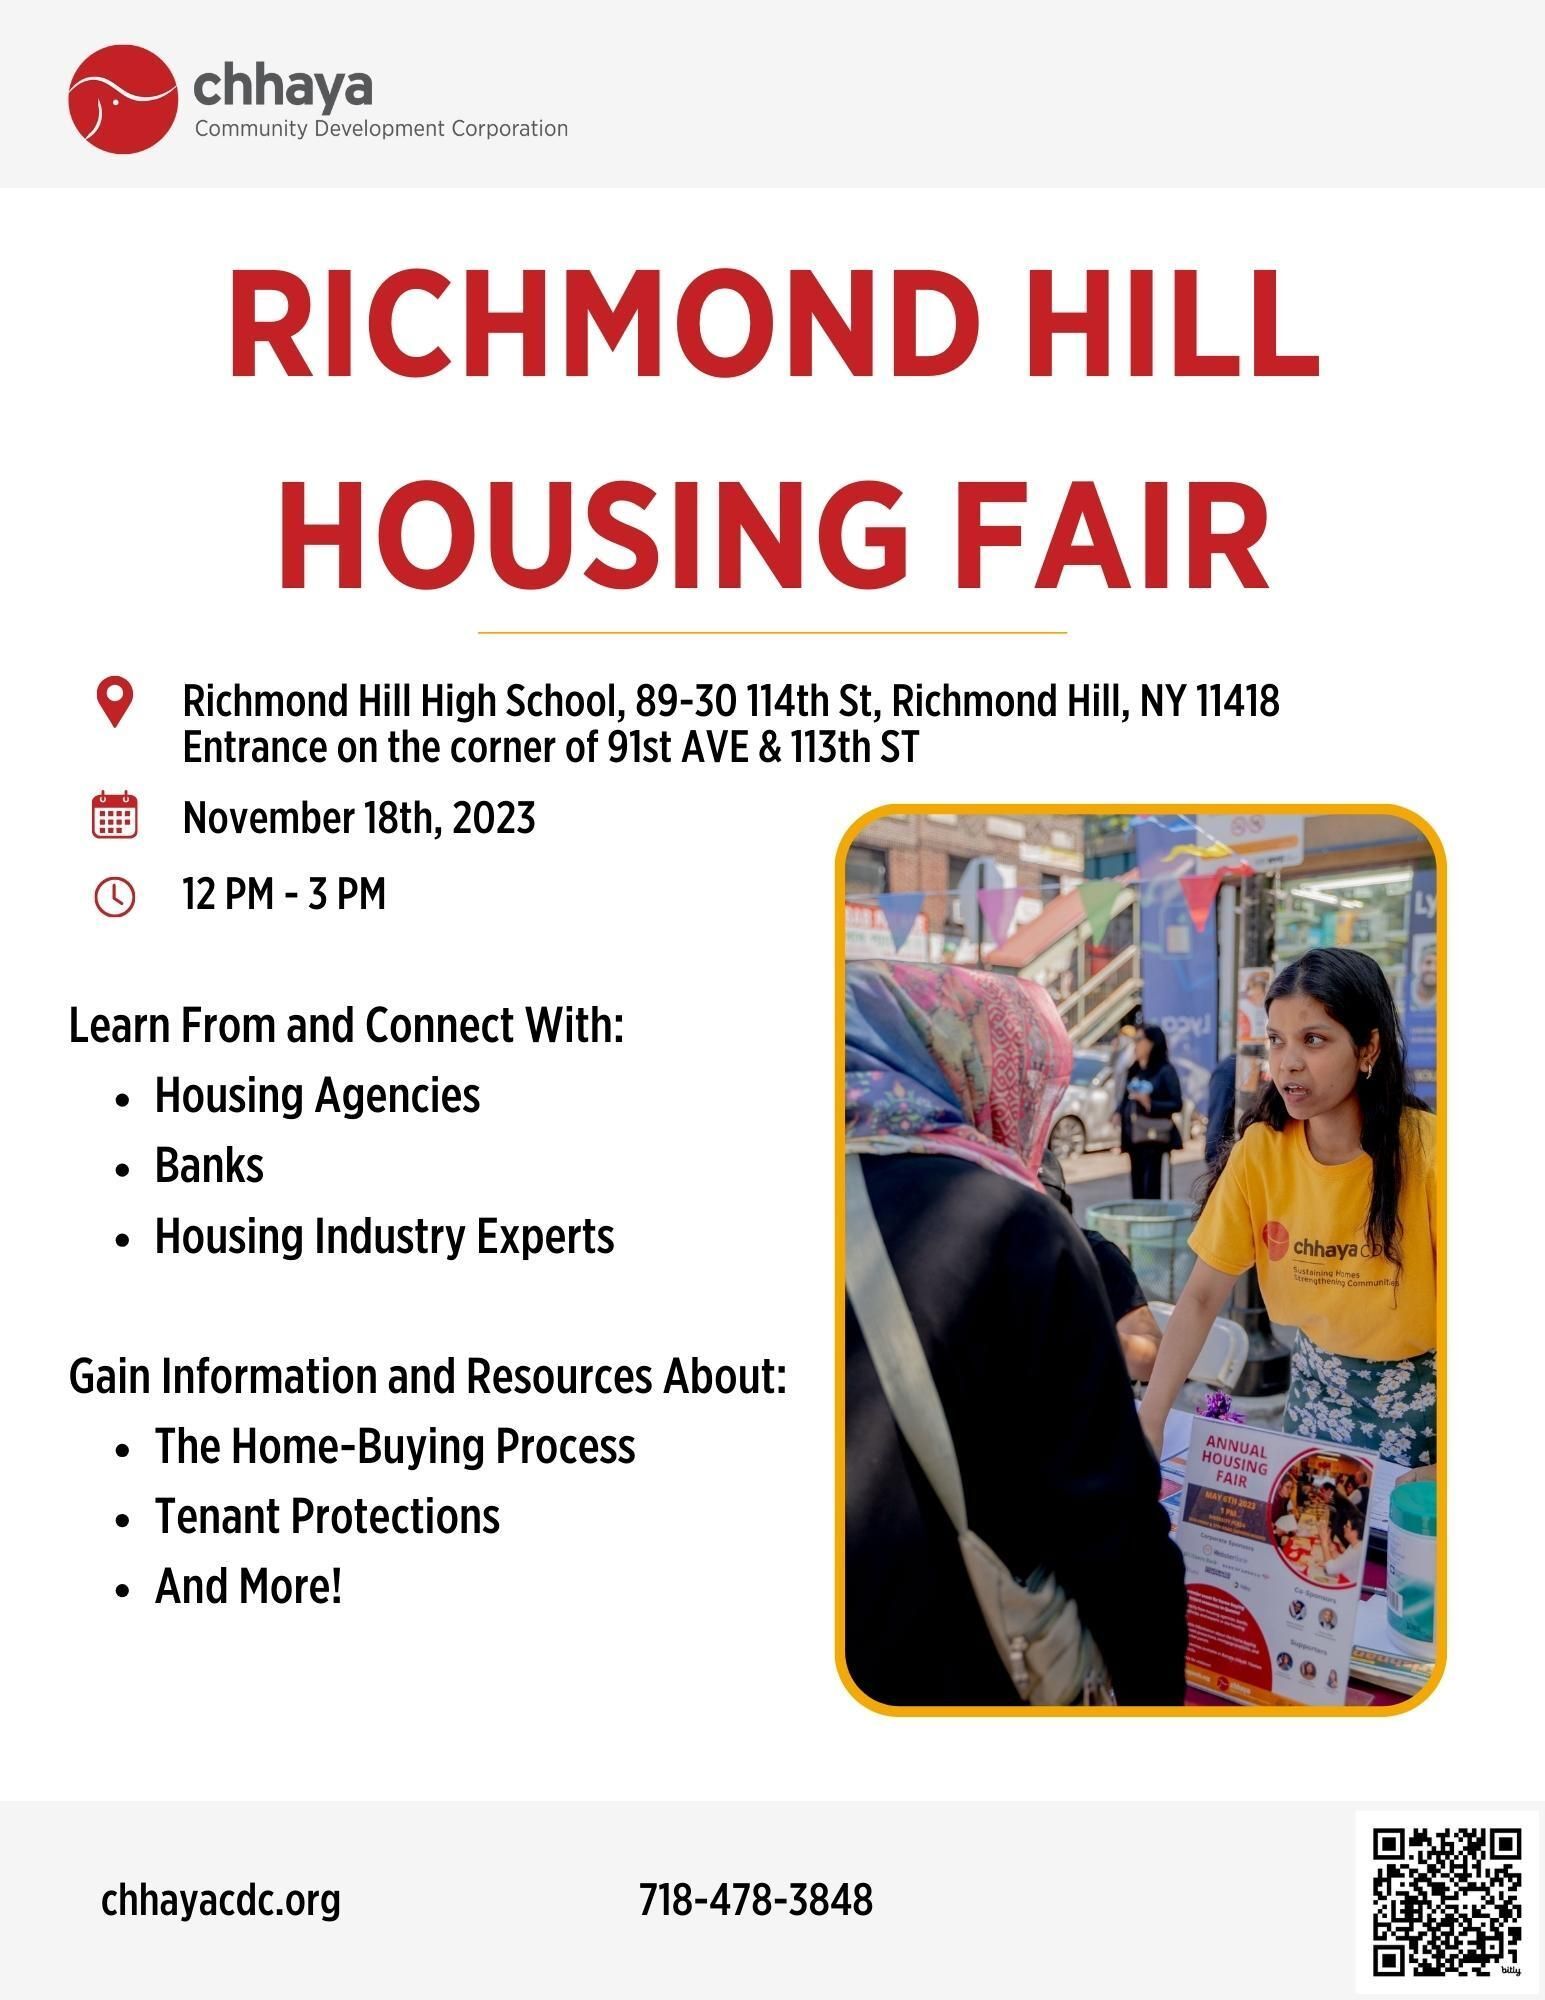 Chhaya flyer reading Richmond Hill Housing Fair with information on location and time listed below and a photo of a woman working at a past housing fair in a yellow Chhaya Tshirt, standing behind a table, speaking with a woman in a black coat and pink and